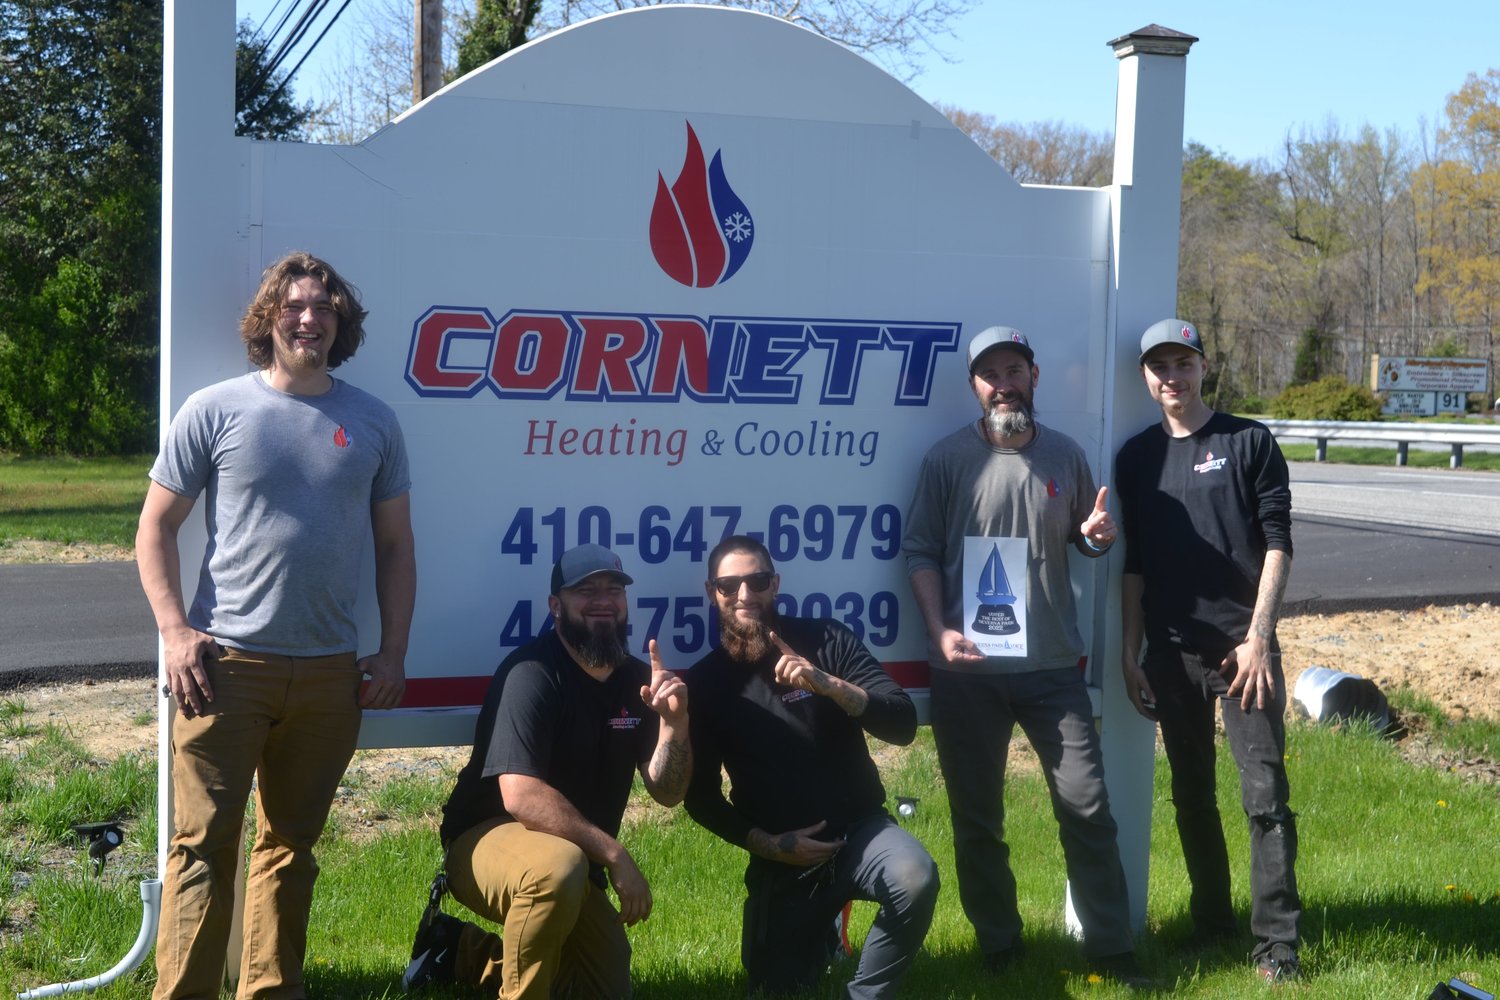 Best HVAC Contractor went to Cornett Heating and Cooling.